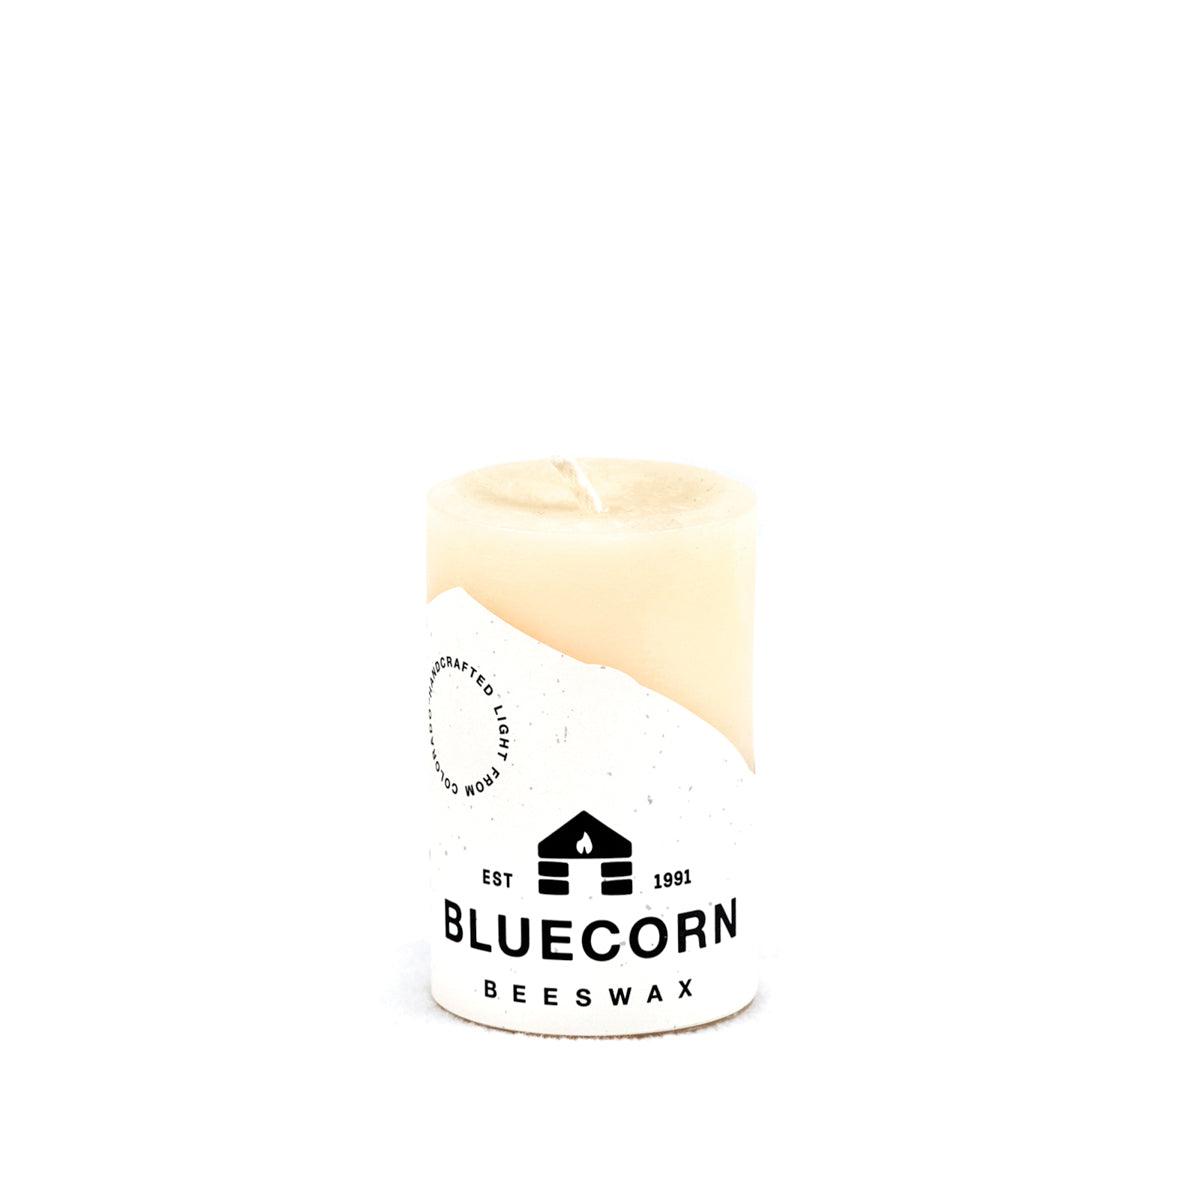 Bluecorn Beeswax 100% Pure Beeswax 2" x 3" Ivory Pillar Candle. Burn Time: 25 hours. Made with 100% Pure Beeswax, is white in color. Made with 100% pure cotton wick, no lead and paraffin free. Clean burning and non-toxic. Features Bluecorn Beeswax label printed on 100% recycled paper.